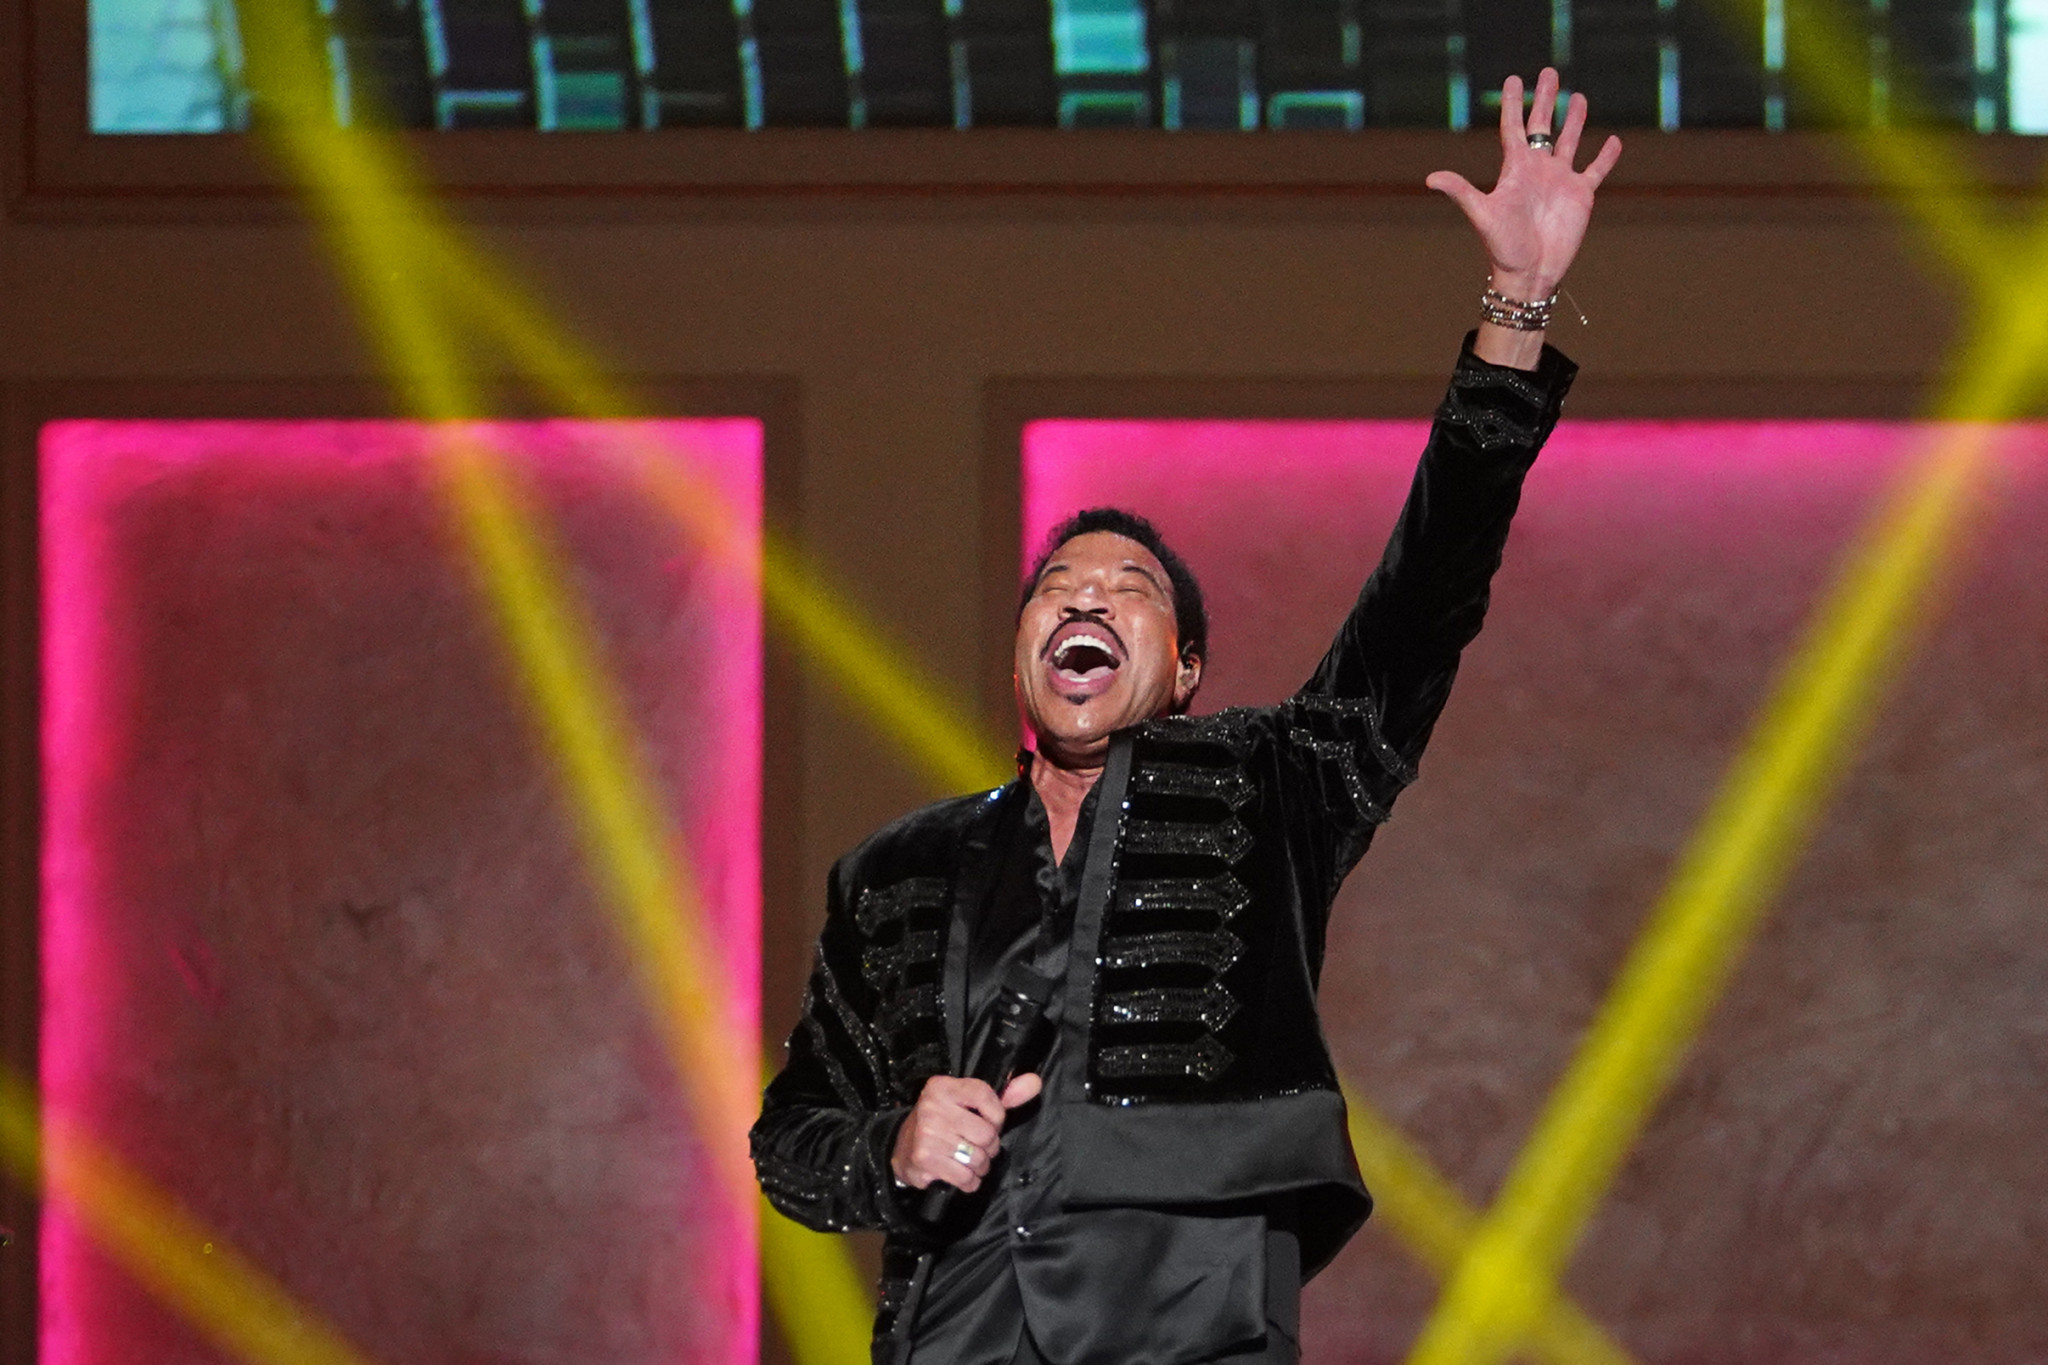 Lionel Richie has been announced as a featured performer at the Closing Ceremony of this year's World Games, due to be held in Birmingham in the United States ©Getty Images